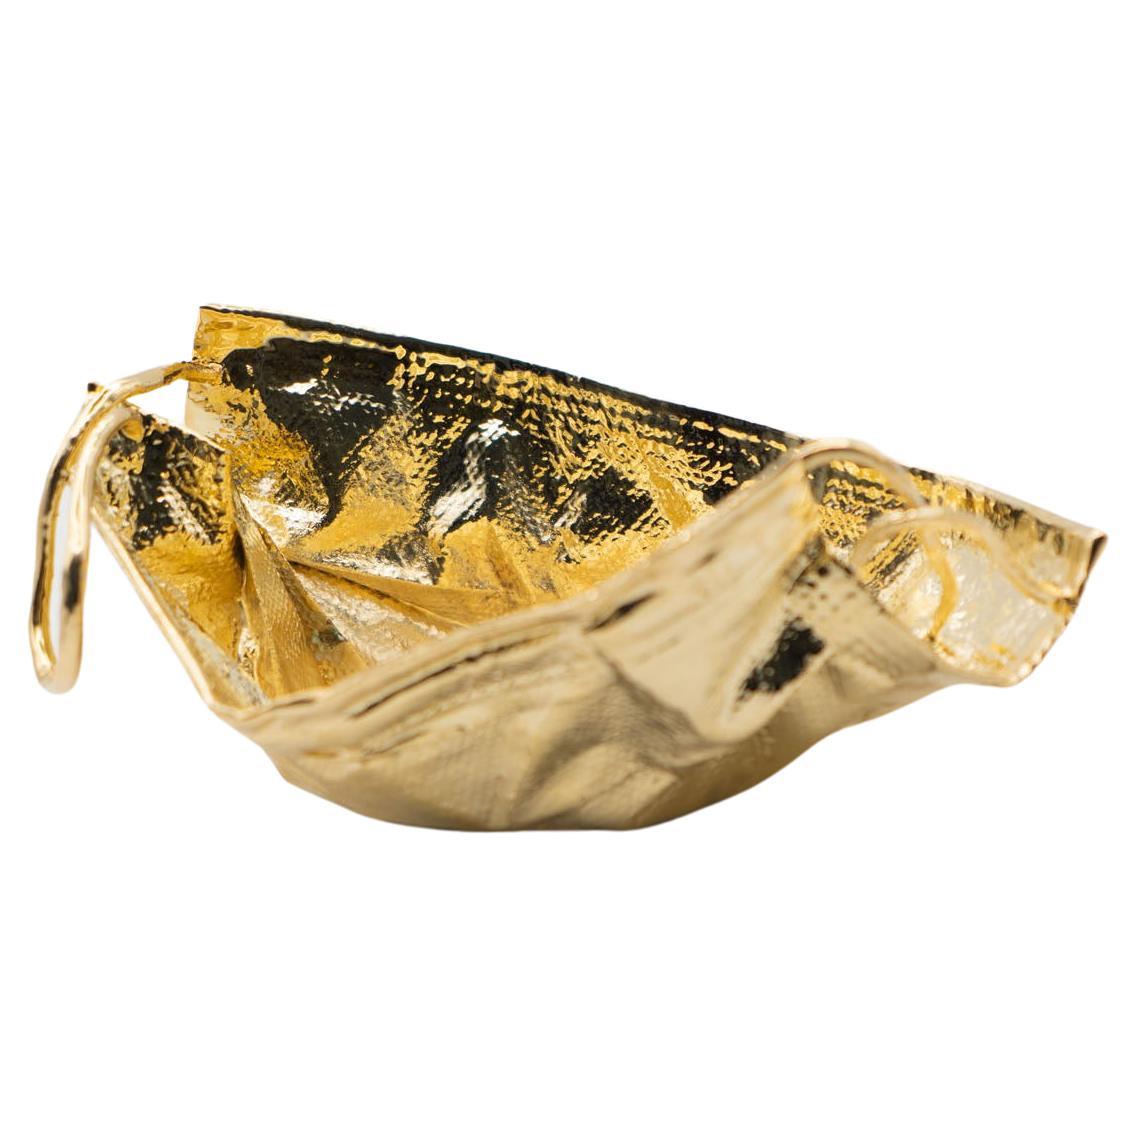 Remask Act 017 Gold Art Object Made from Surgical Mask by Enrico Girotti For Sale